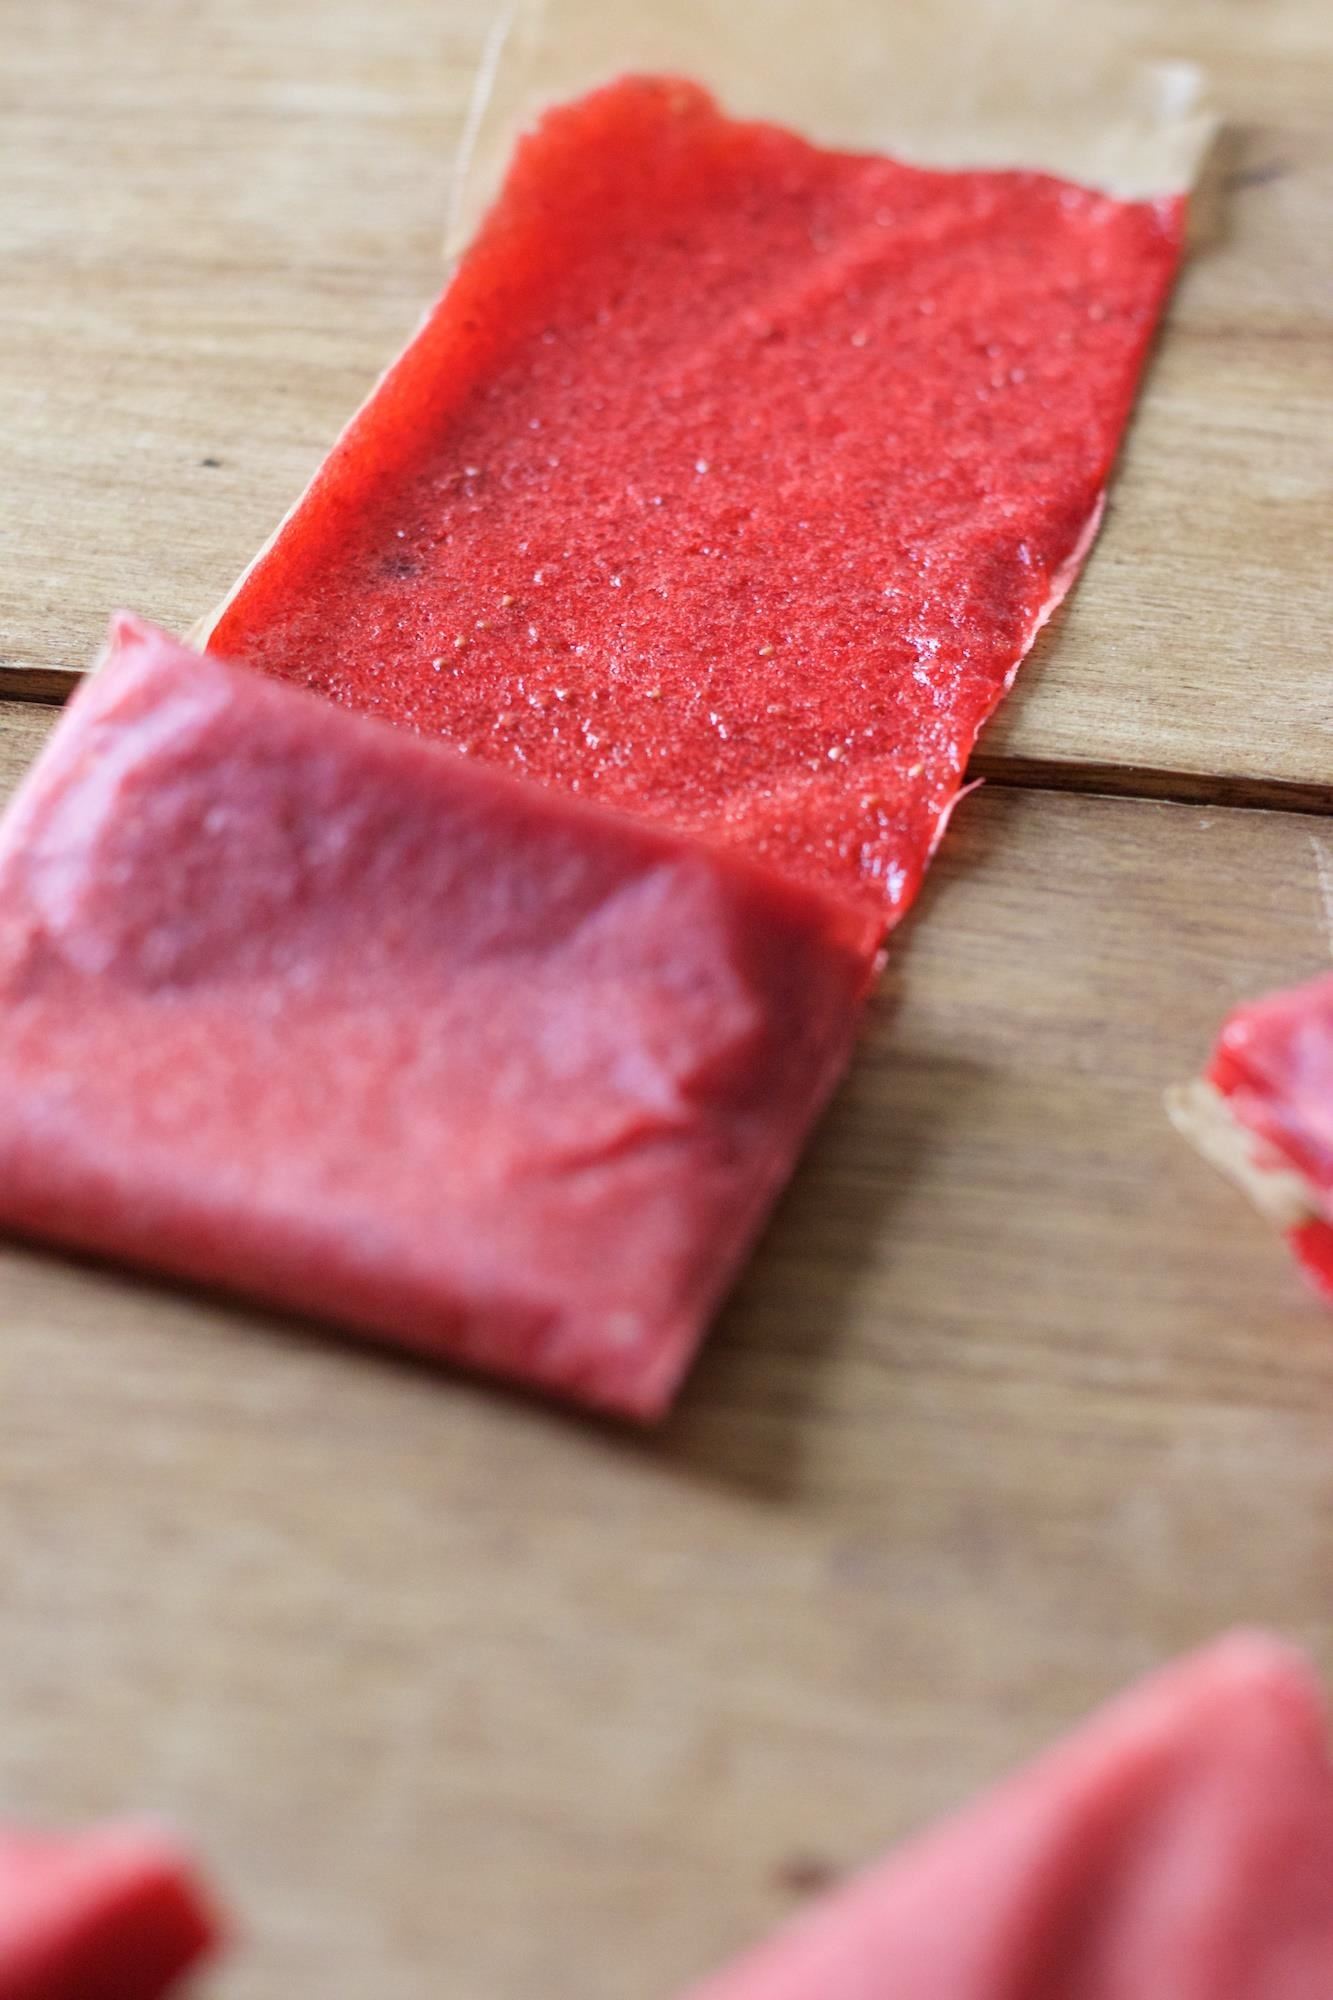 Send Your Kids Back to School with These DIY Fruit Roll-Ups